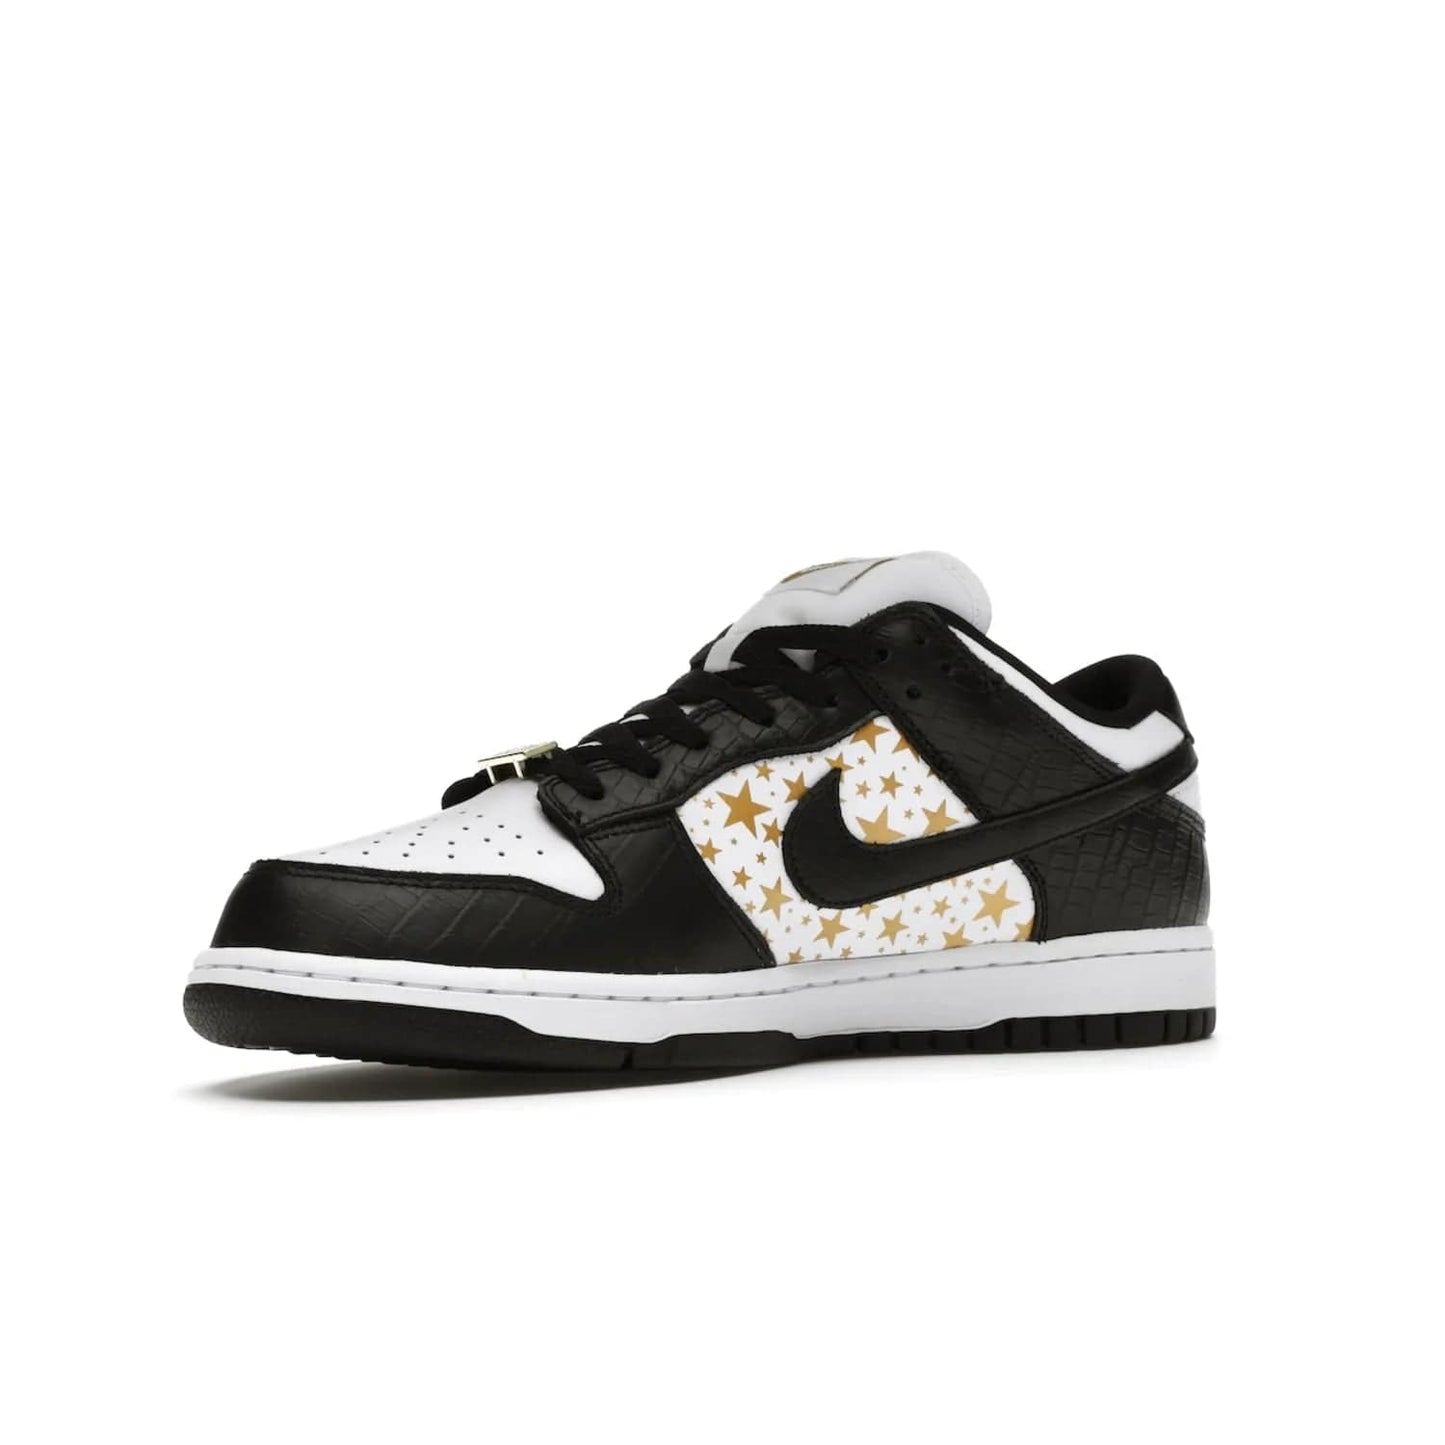 Nike SB Dunk Low Supreme Stars Black (2021) - Image 16 - Only at www.BallersClubKickz.com - Retro style and signature details make the Nike SB Dunk Low Supreme Black a must-have. This special edition shoe features a white leather upper and black croc skin overlays complemented by gold stars and deubré. Enjoy a piece of SB history and grab yours today.